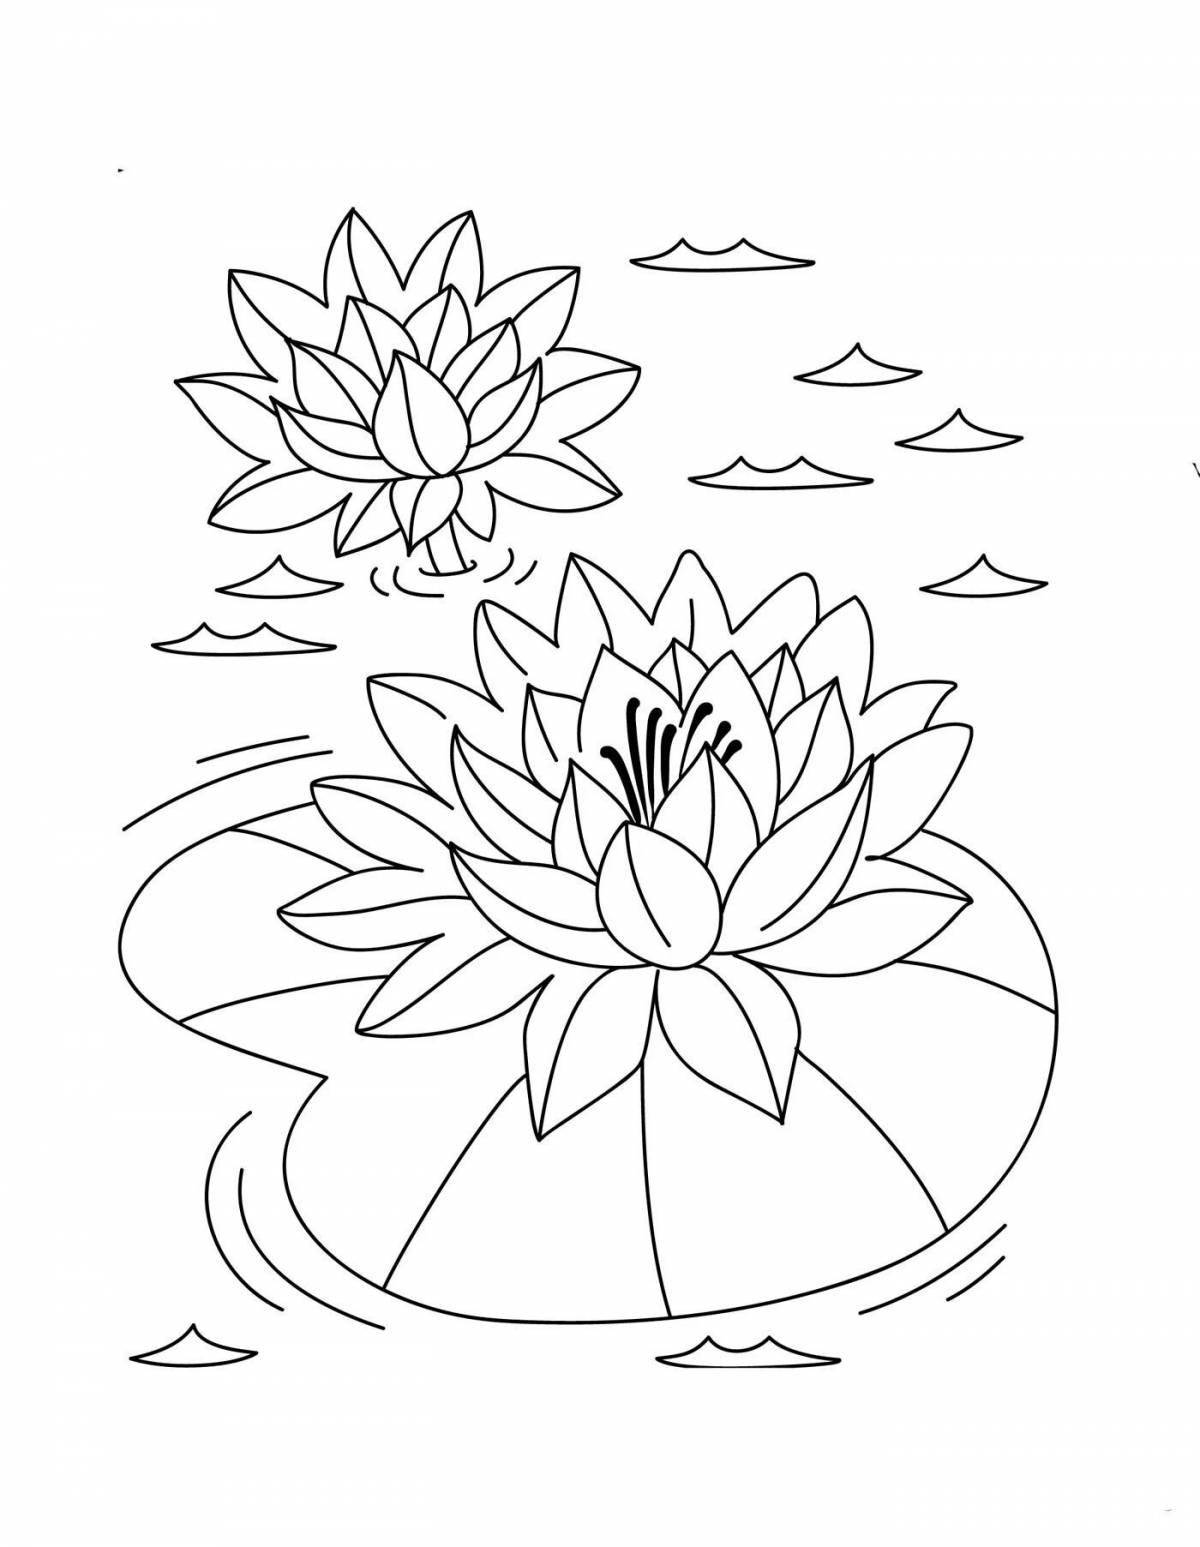 Living lotus coloring page for kids